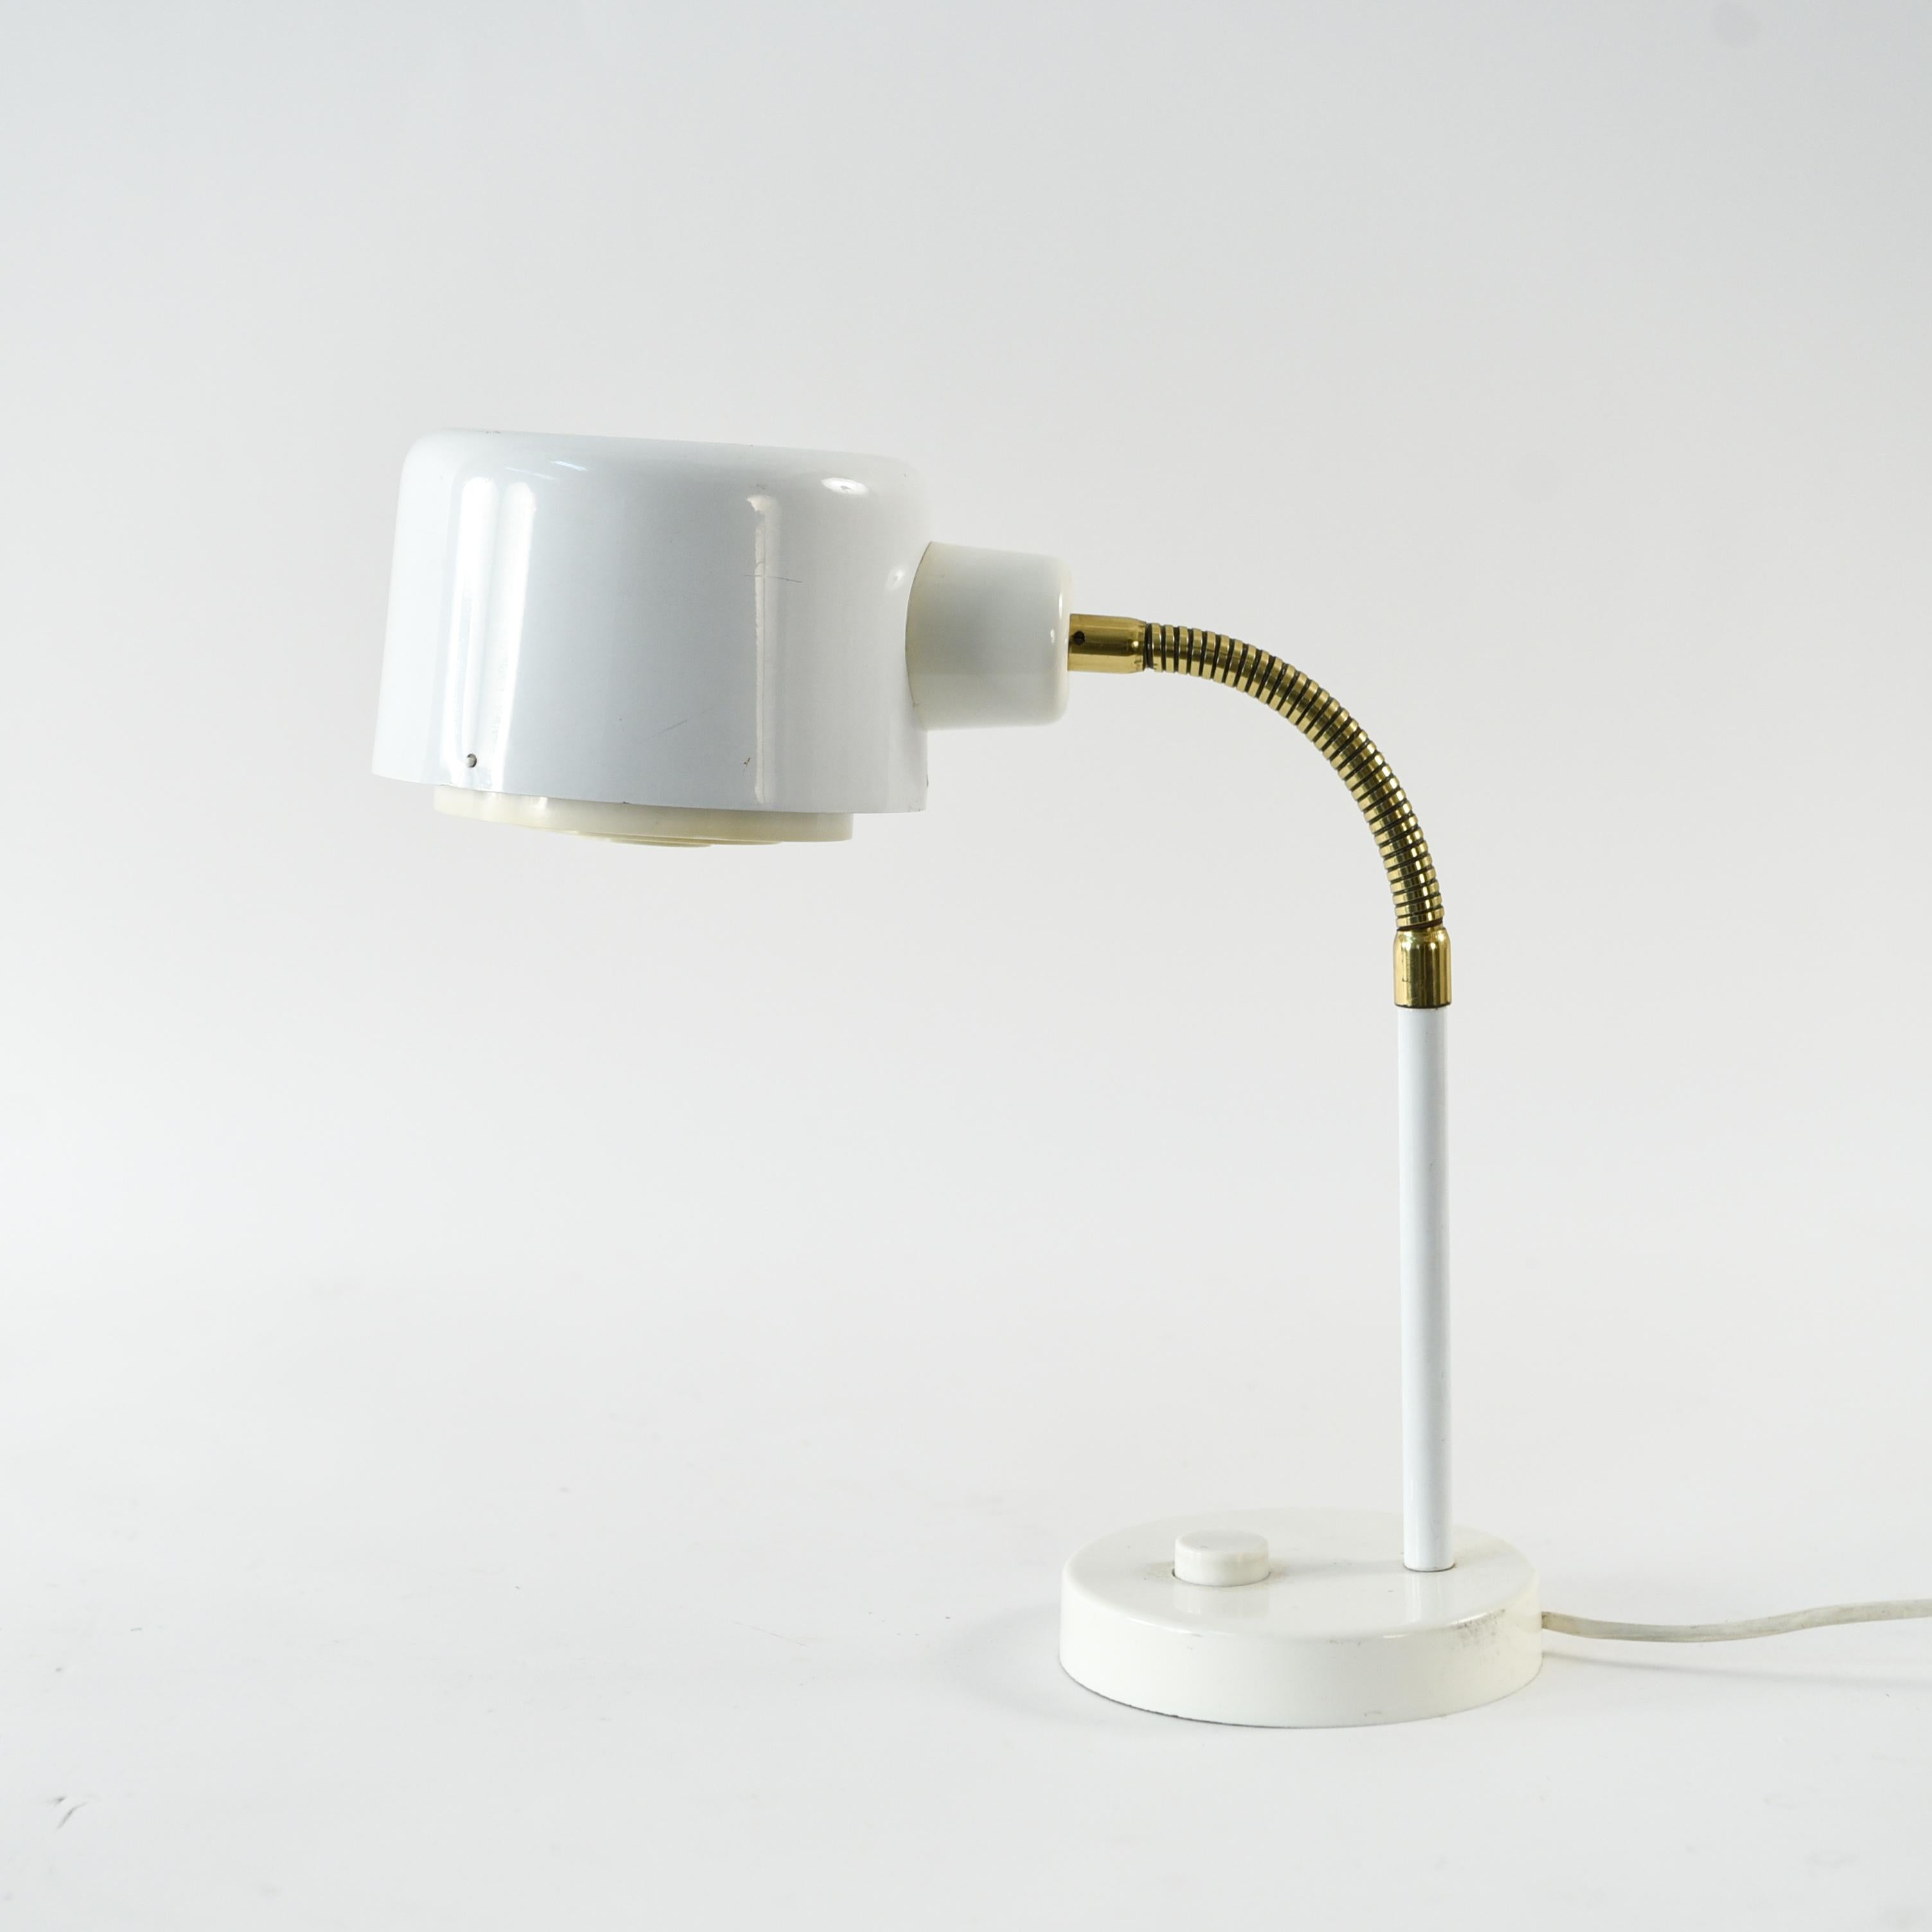 This is a desk or table lamp is in the manner of one designed by Anders Pehrson for Ateljé Lyktan in model 